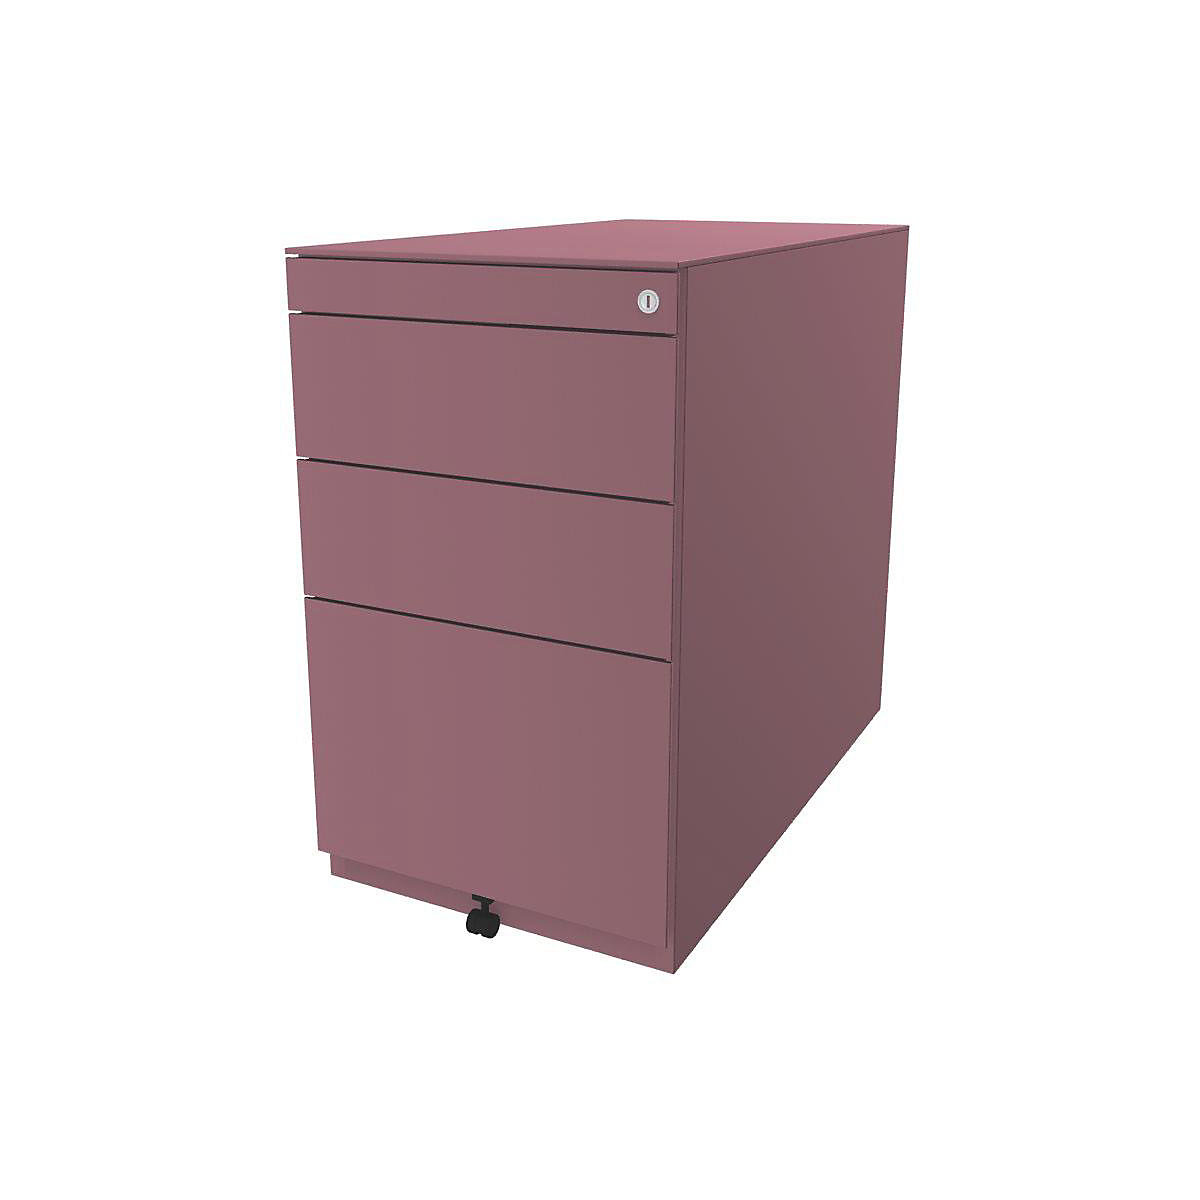 Note™ fixed pedestal, with 2 universal drawers, 1 suspension file drawer - BISLEY